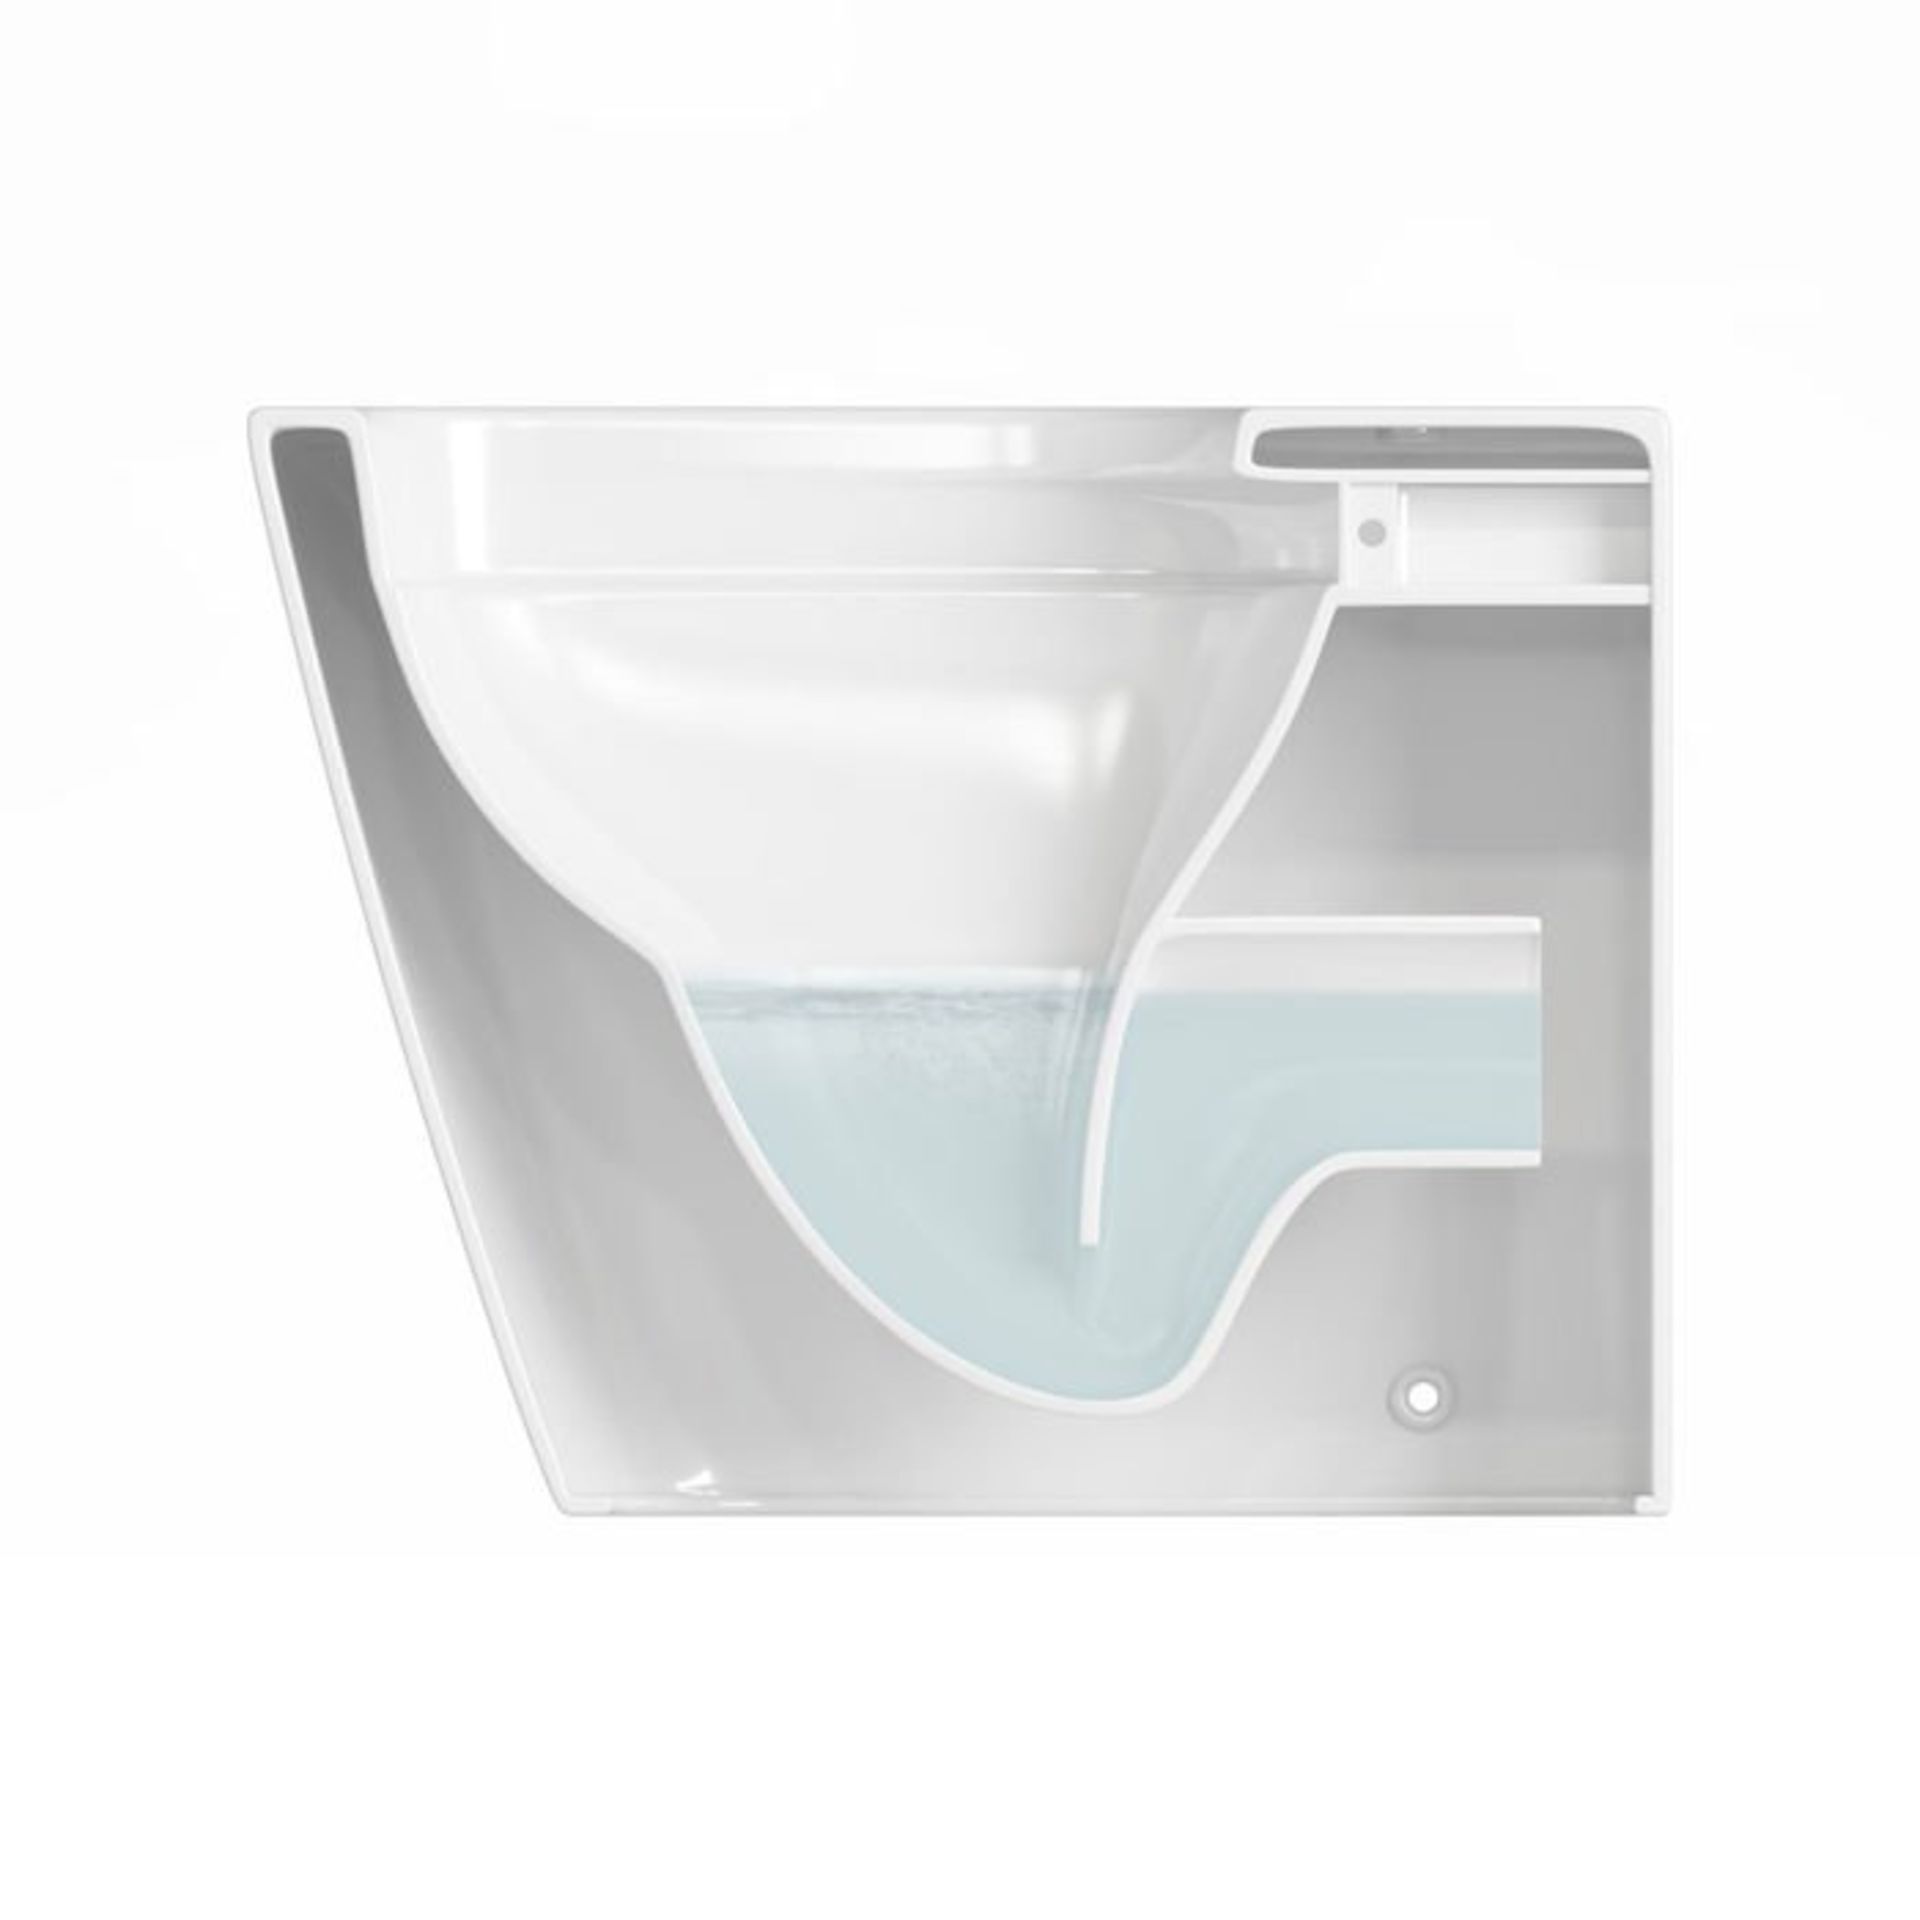 (S62) Florence Rimless Back to Wall Toilet inc Luxury Soft Close Seat RRP £349.99 Rimless design - Image 3 of 3